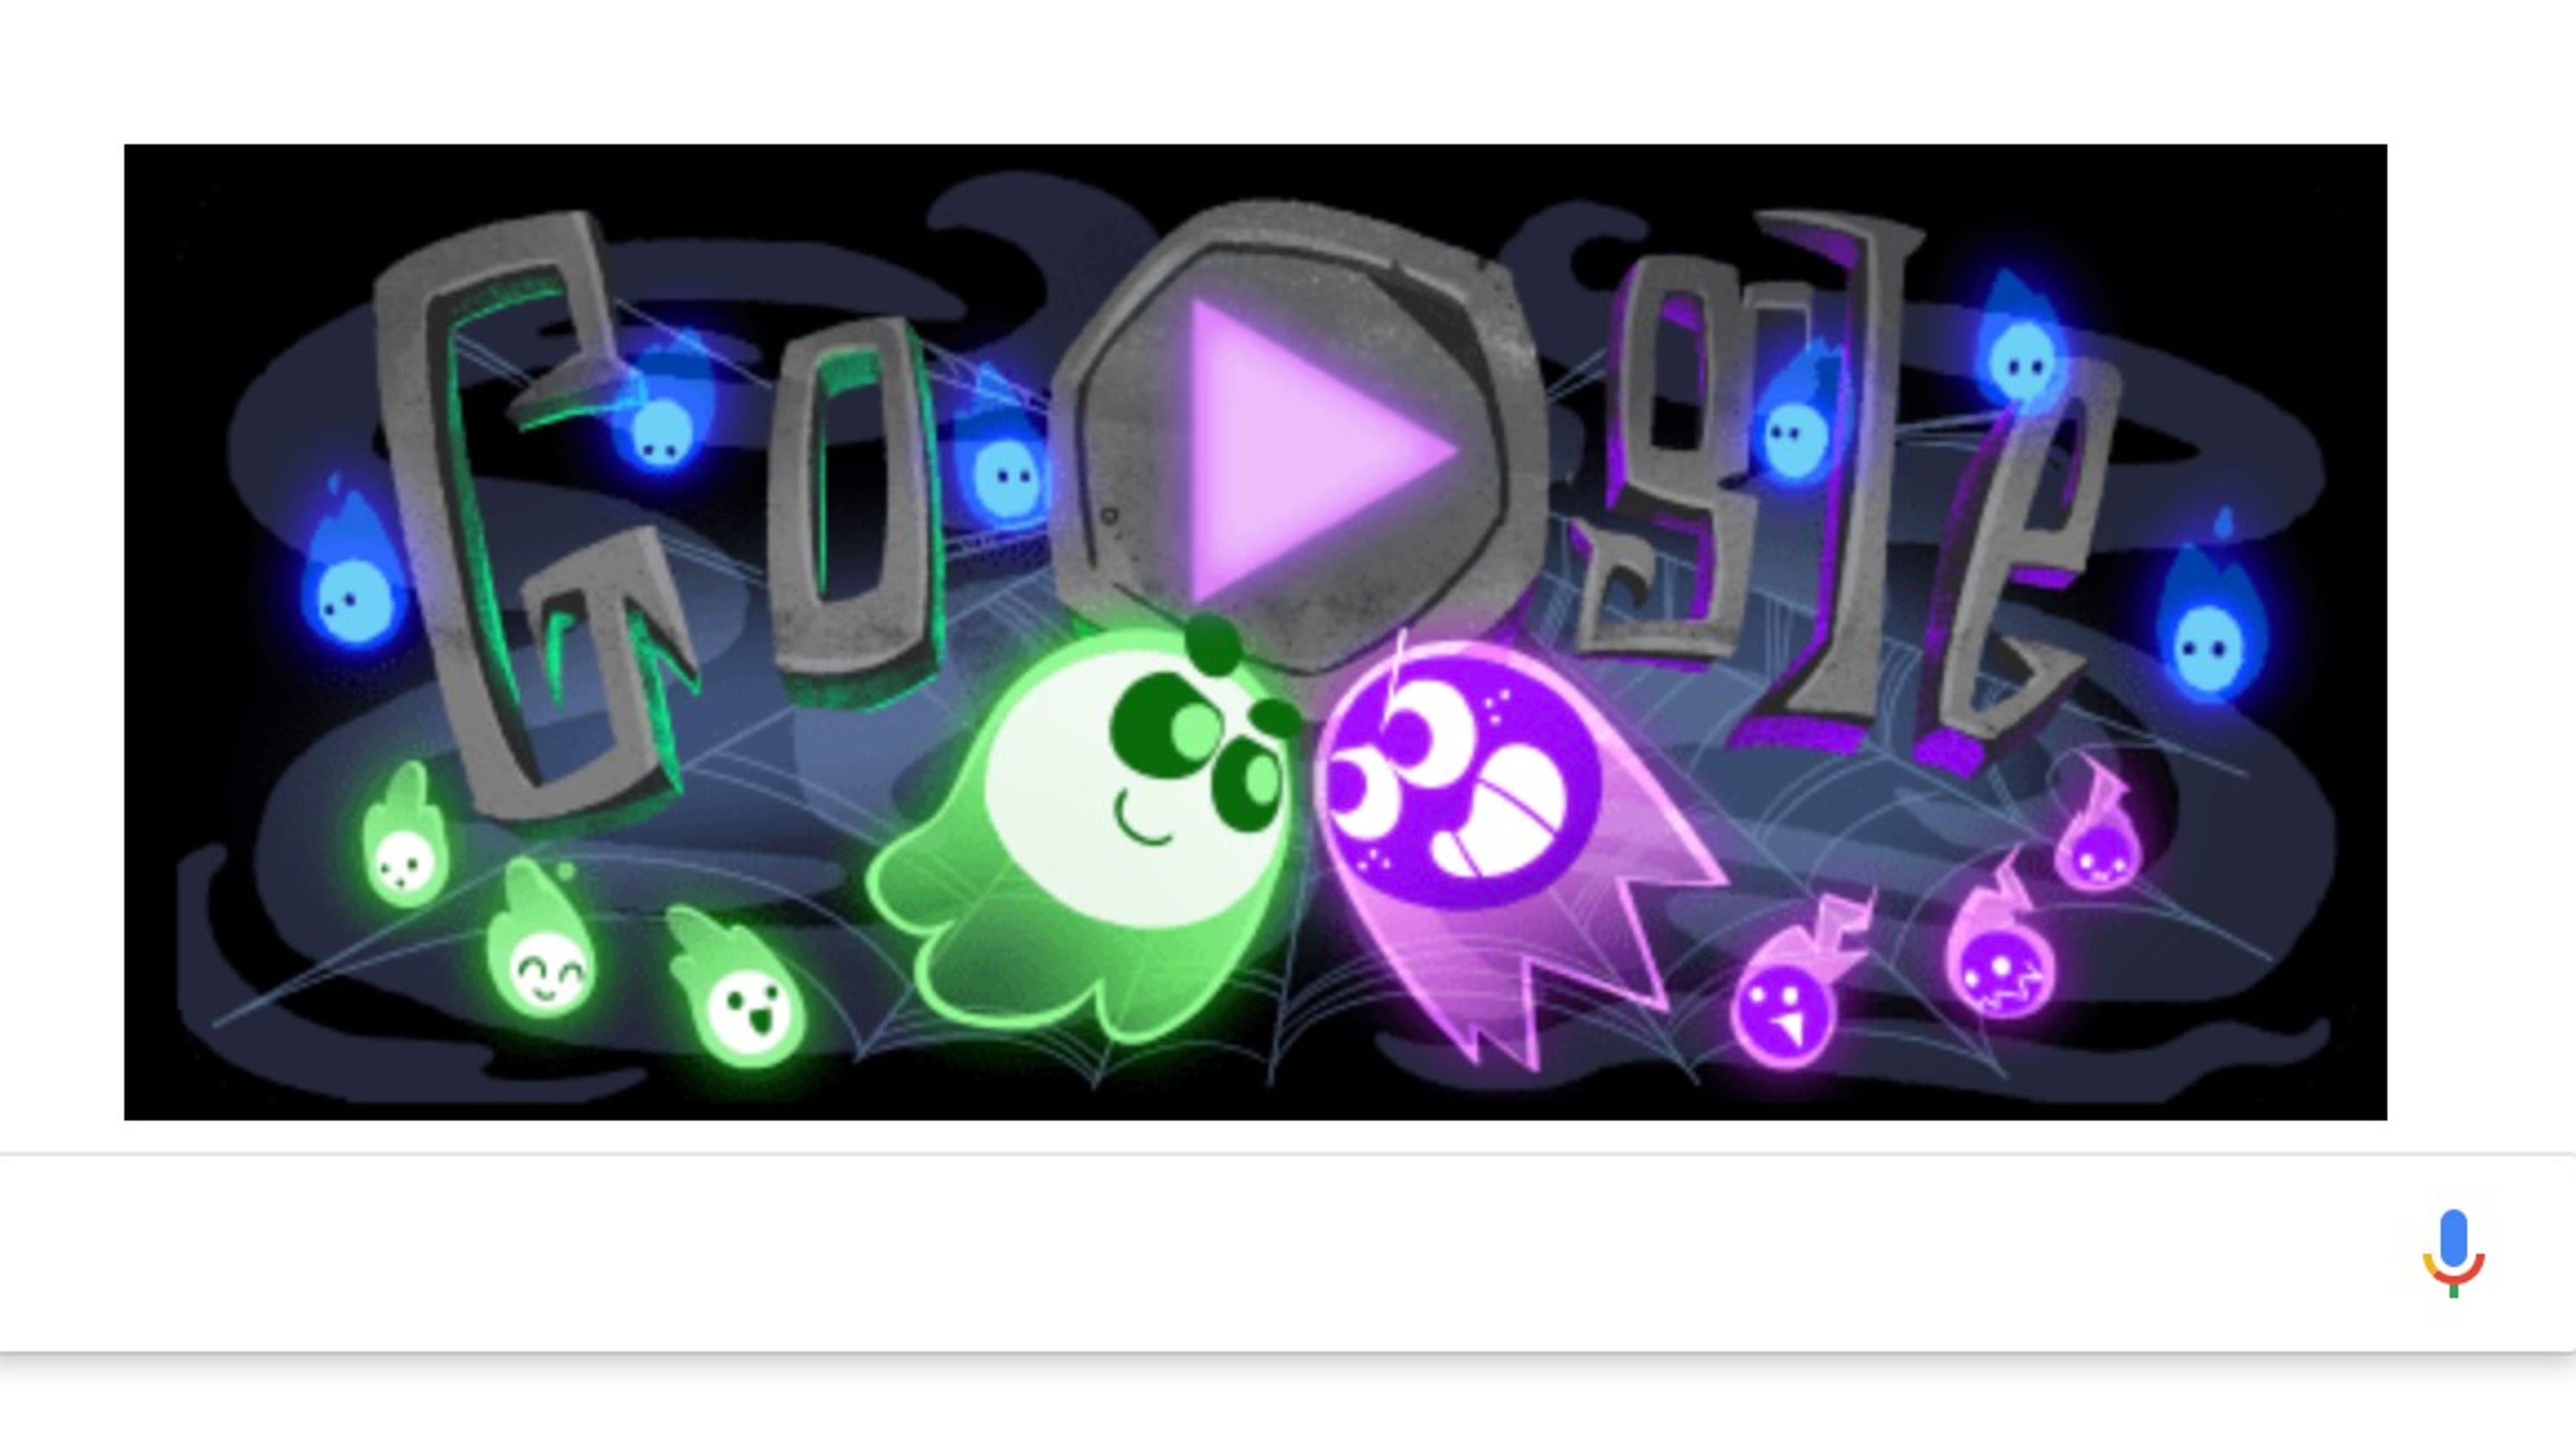 google ghost doodle play